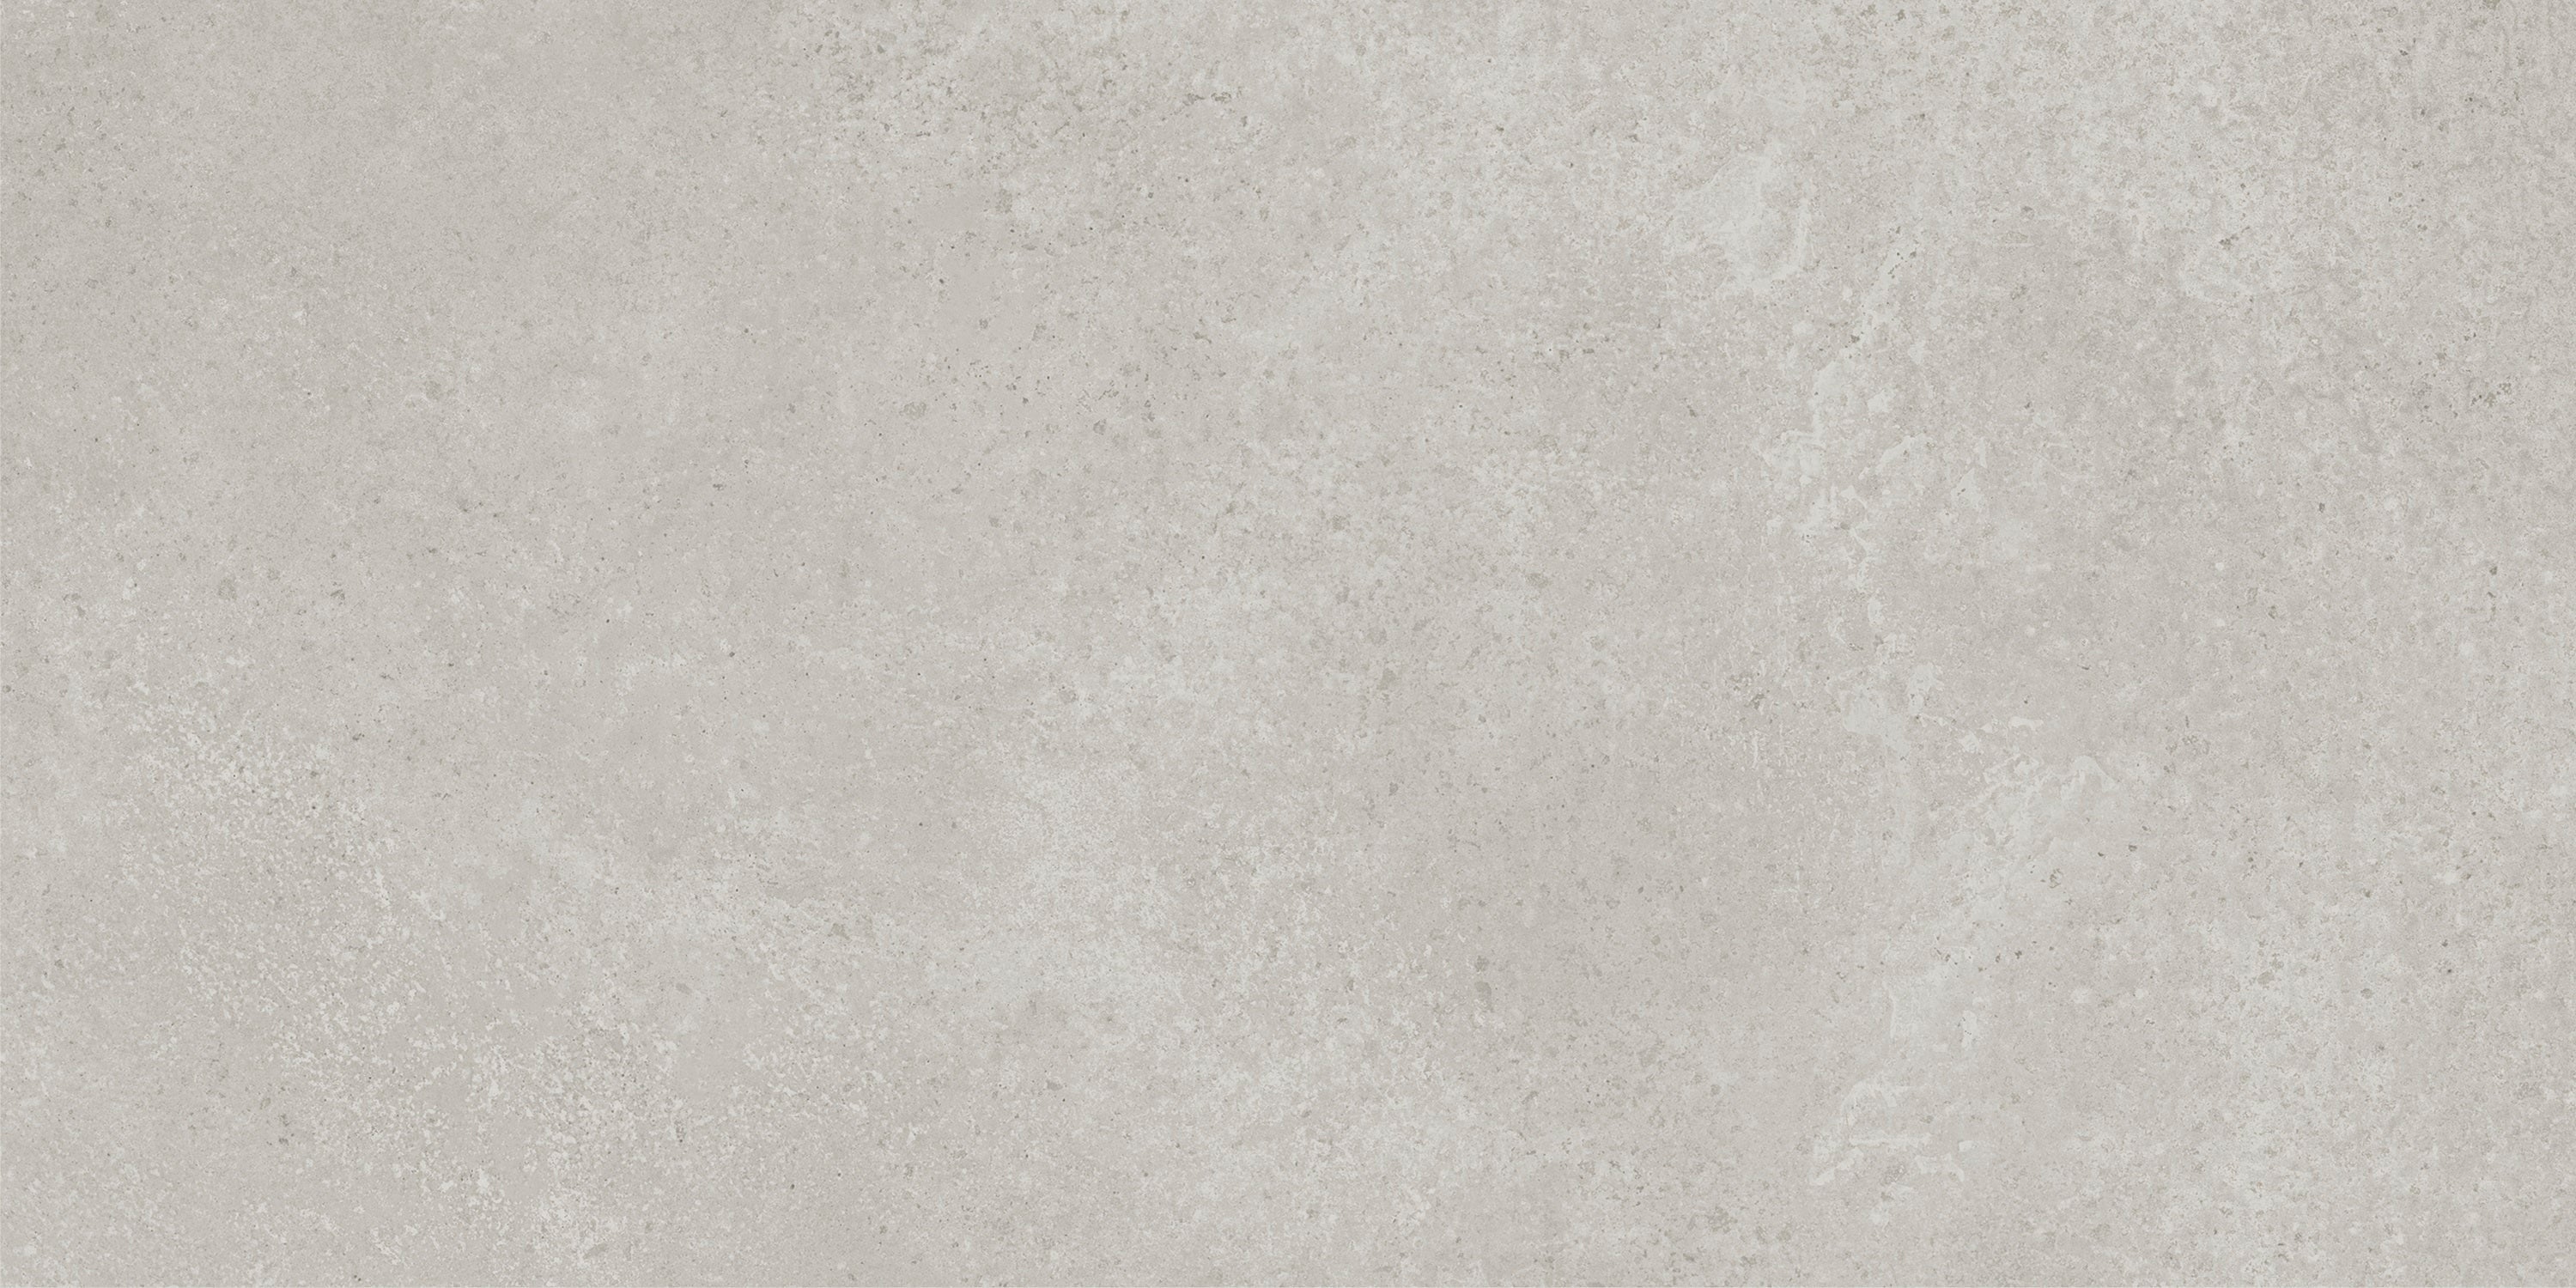 landmark 9mm madein passion silver field tile 12x24x9mm matte rectified porcelain tile distributed by surface group international